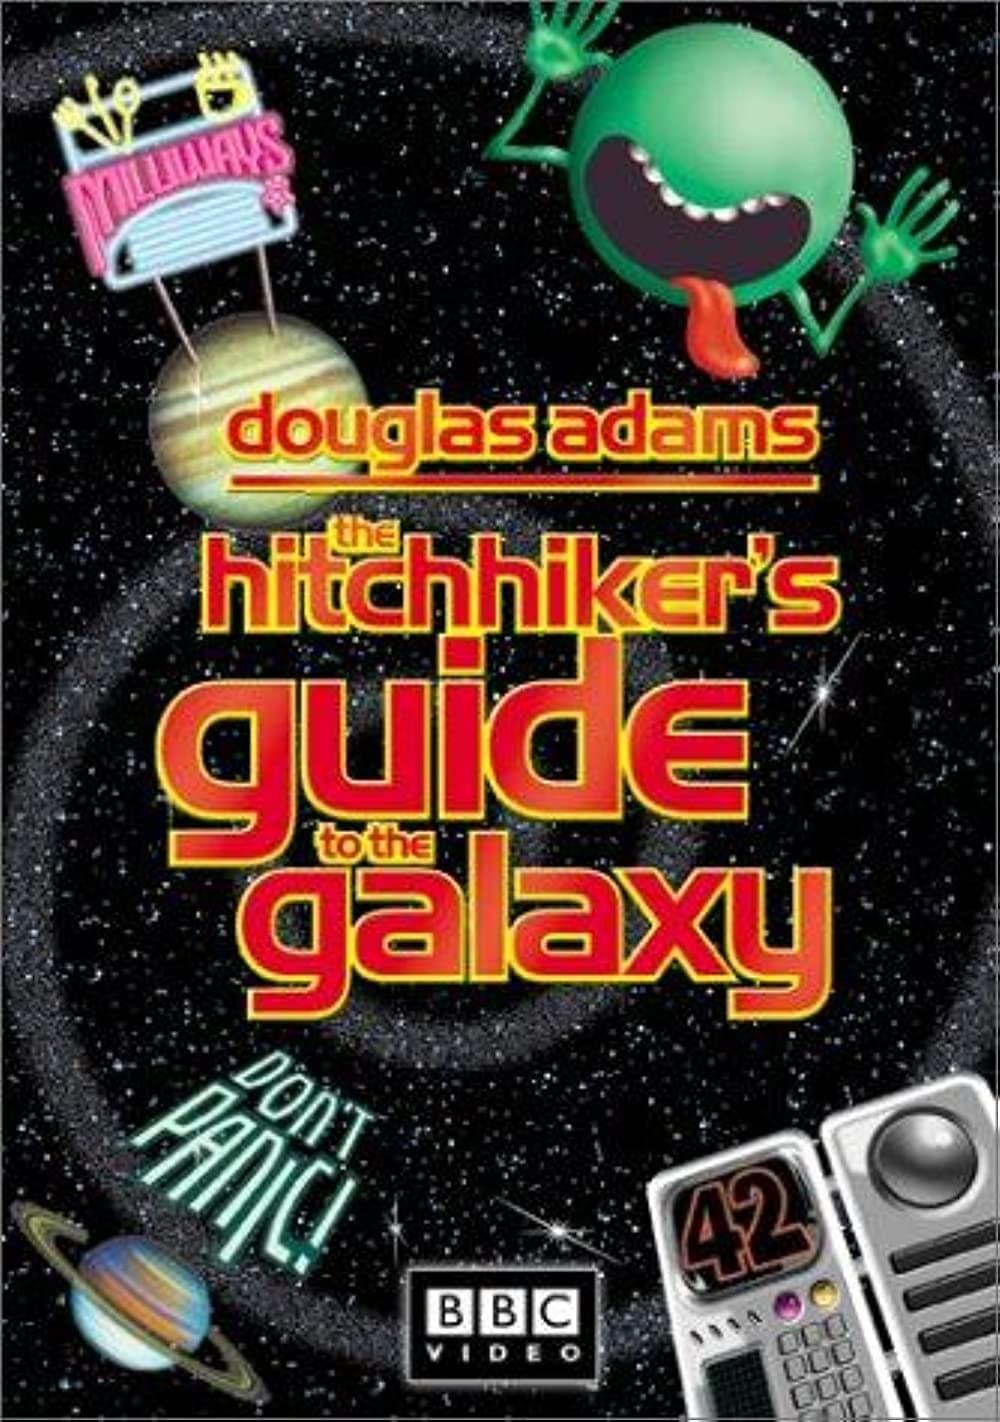 The Hitch Hikers Guide to the Galaxy poster